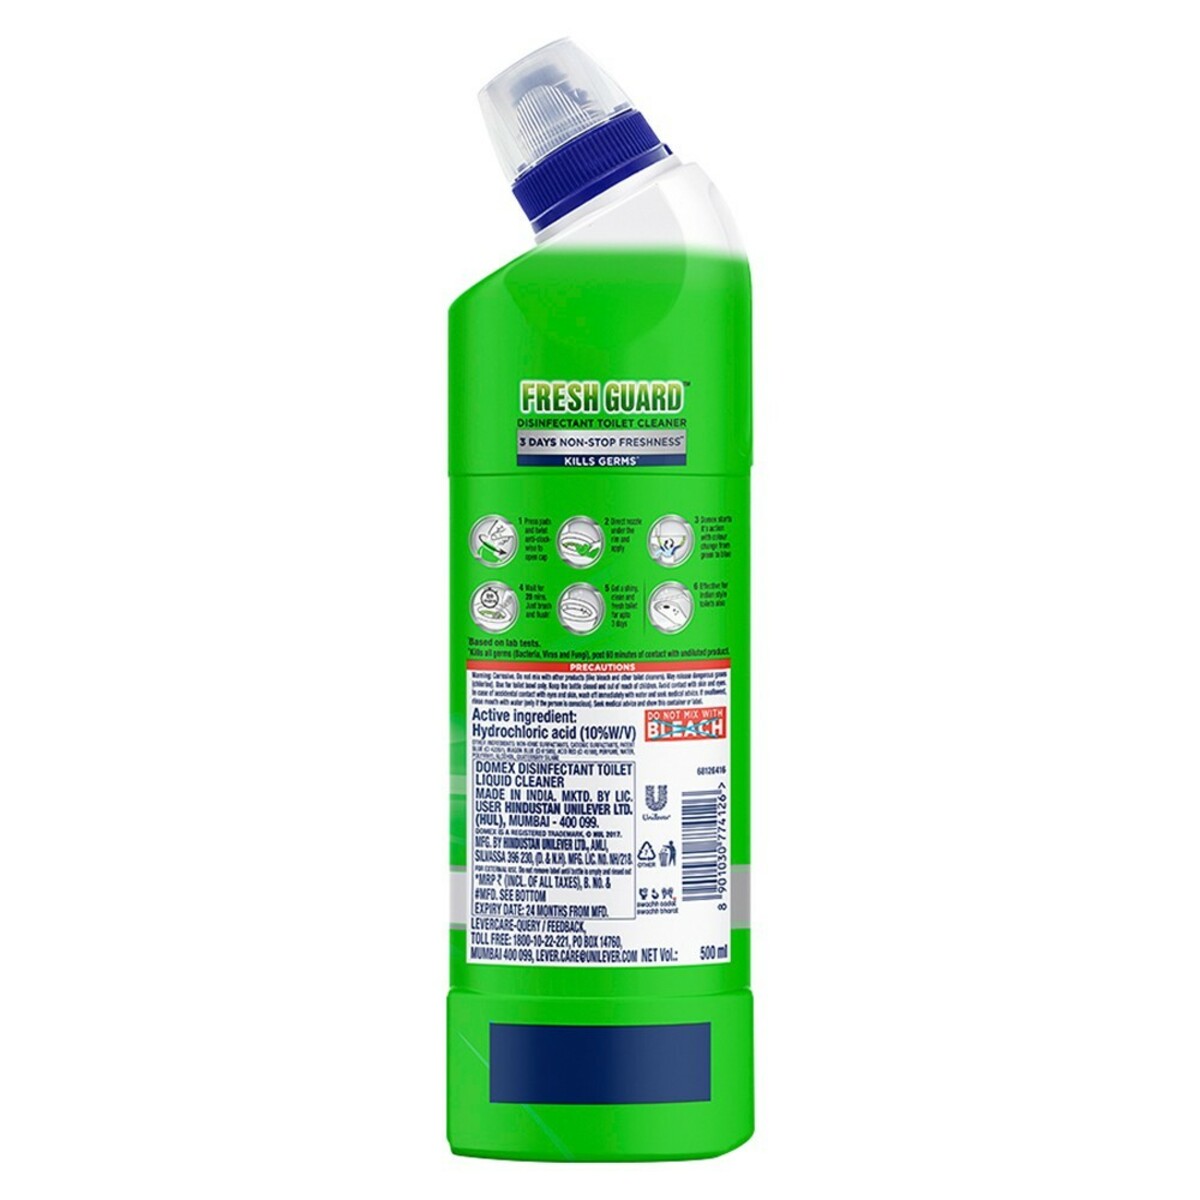 Domex Toilet Cleaner Lime Fresh Clean 500ml